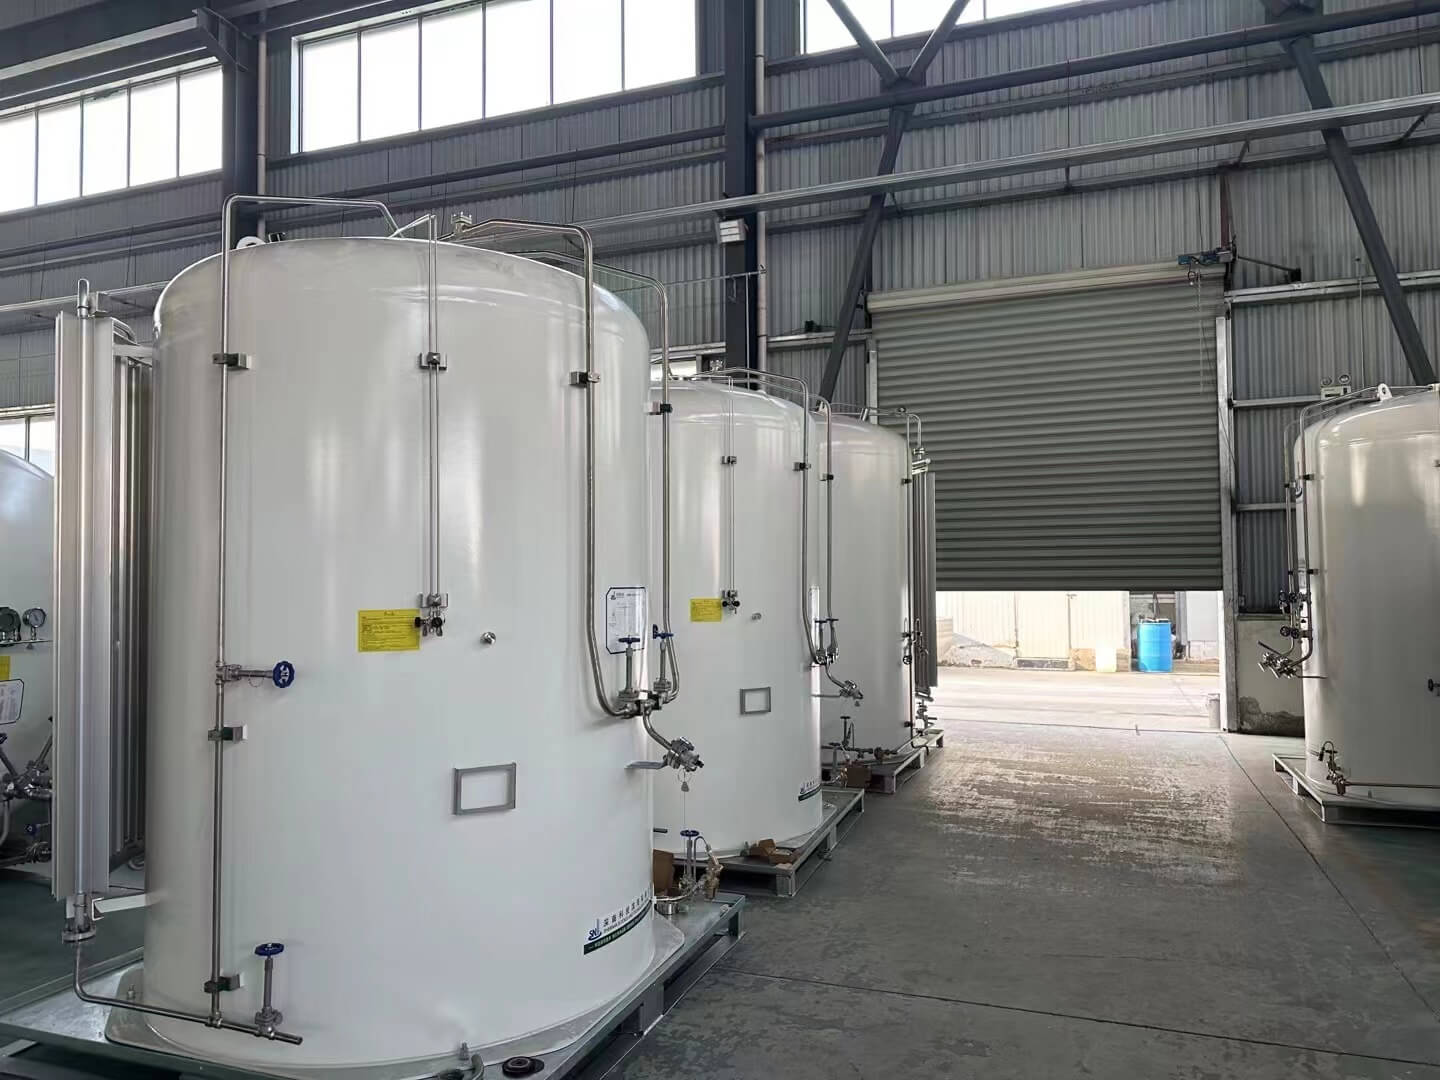 How does a cryogenic storage tank work?